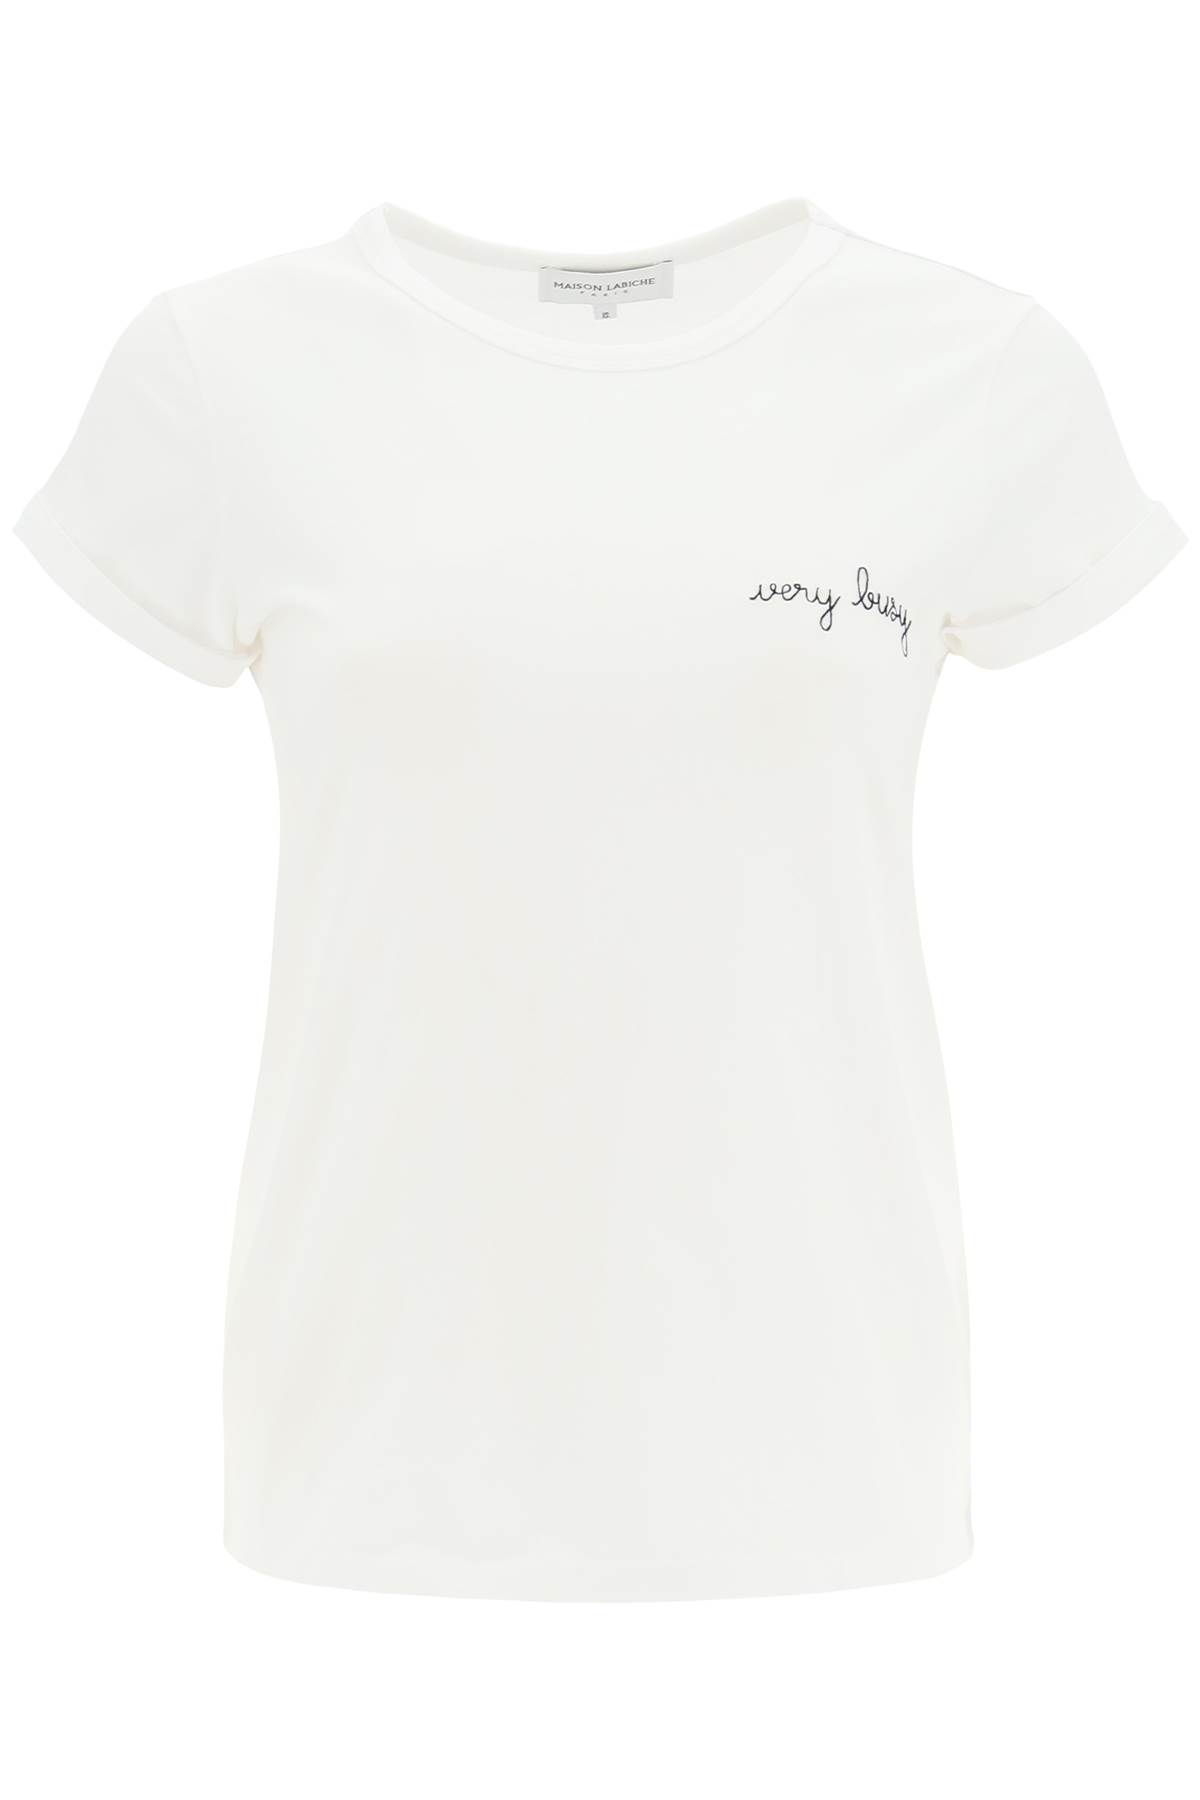 Maison Labiche Poitou T-shirt With Very Busy Embroidery